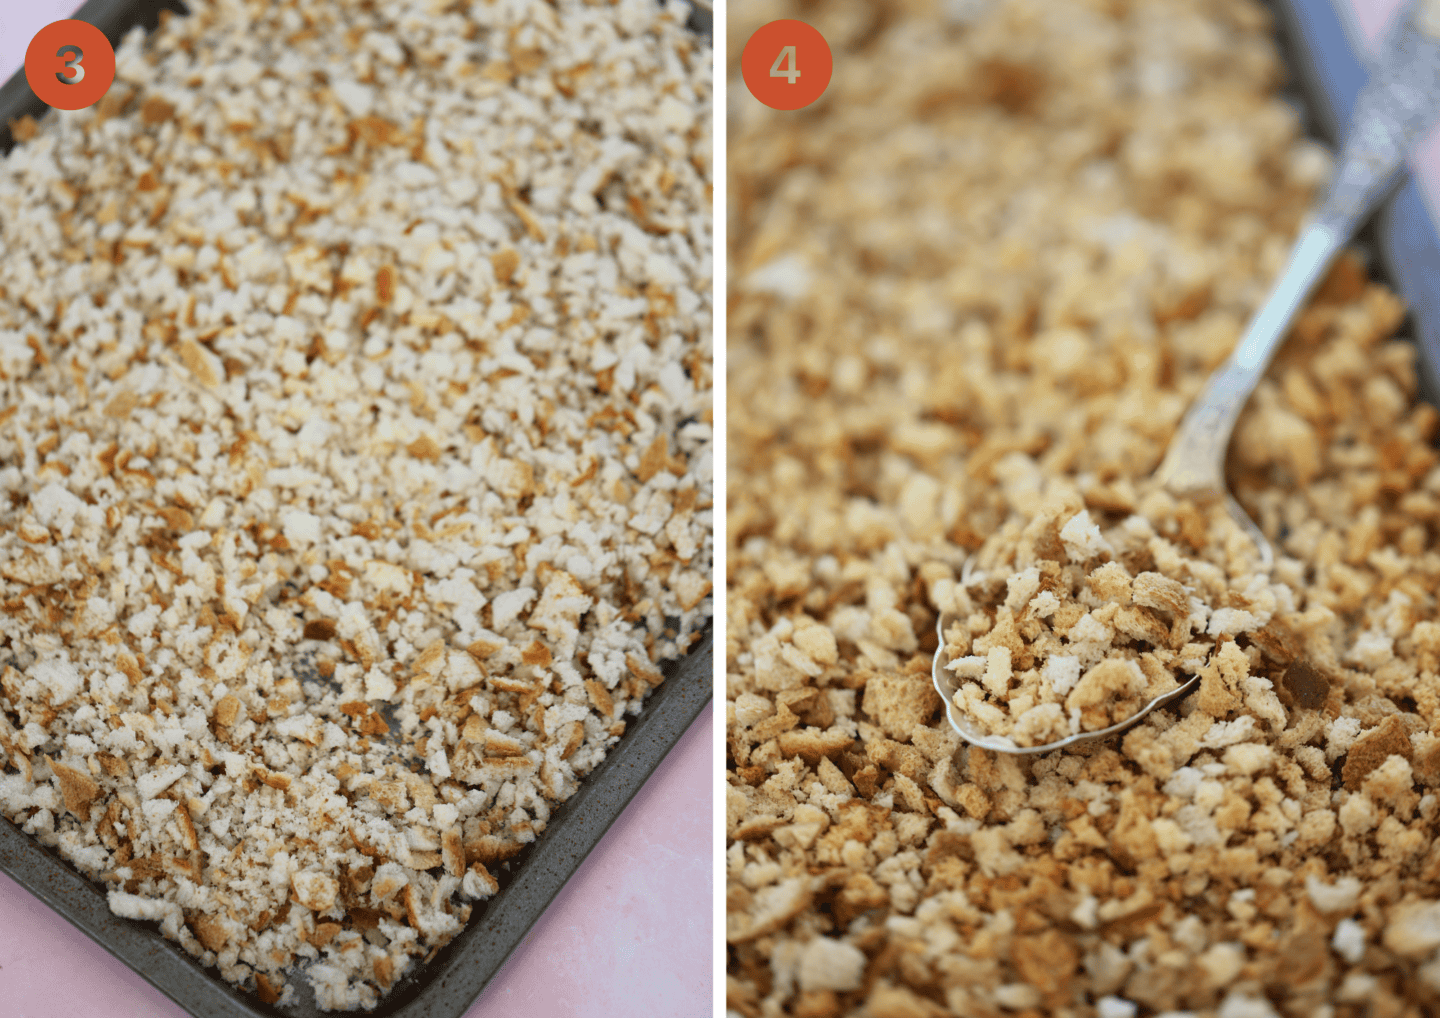 Gluten free bread crumbs before (left) and after (right) baking.